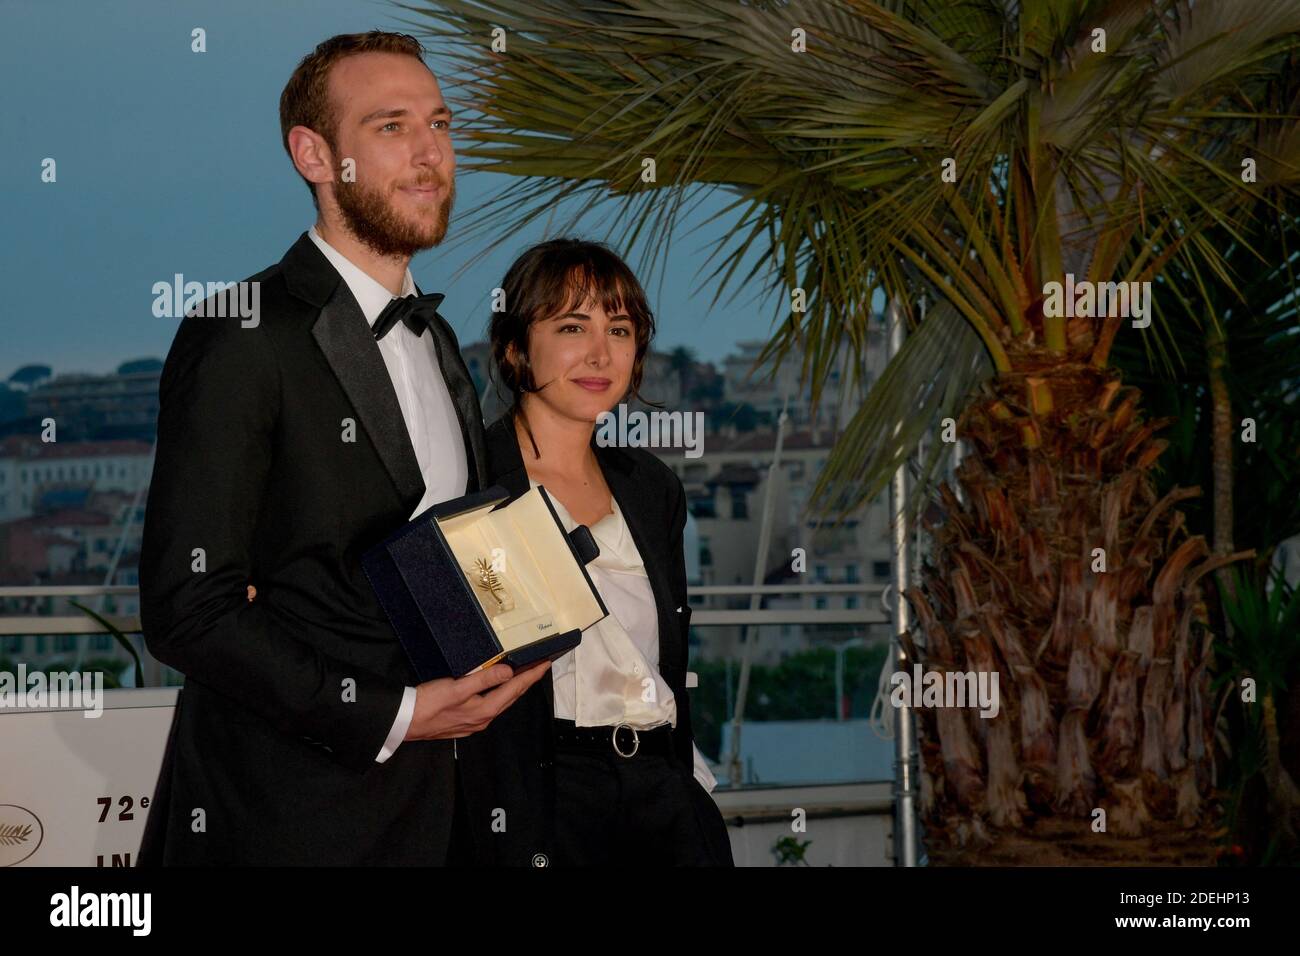 Vasilis Kekatos winner of the Best Short Film award for The Distance  Between Us and The Sky, and Agustina San Martín attending the Winners  photocall during the 72nd Cannes Film Festival in